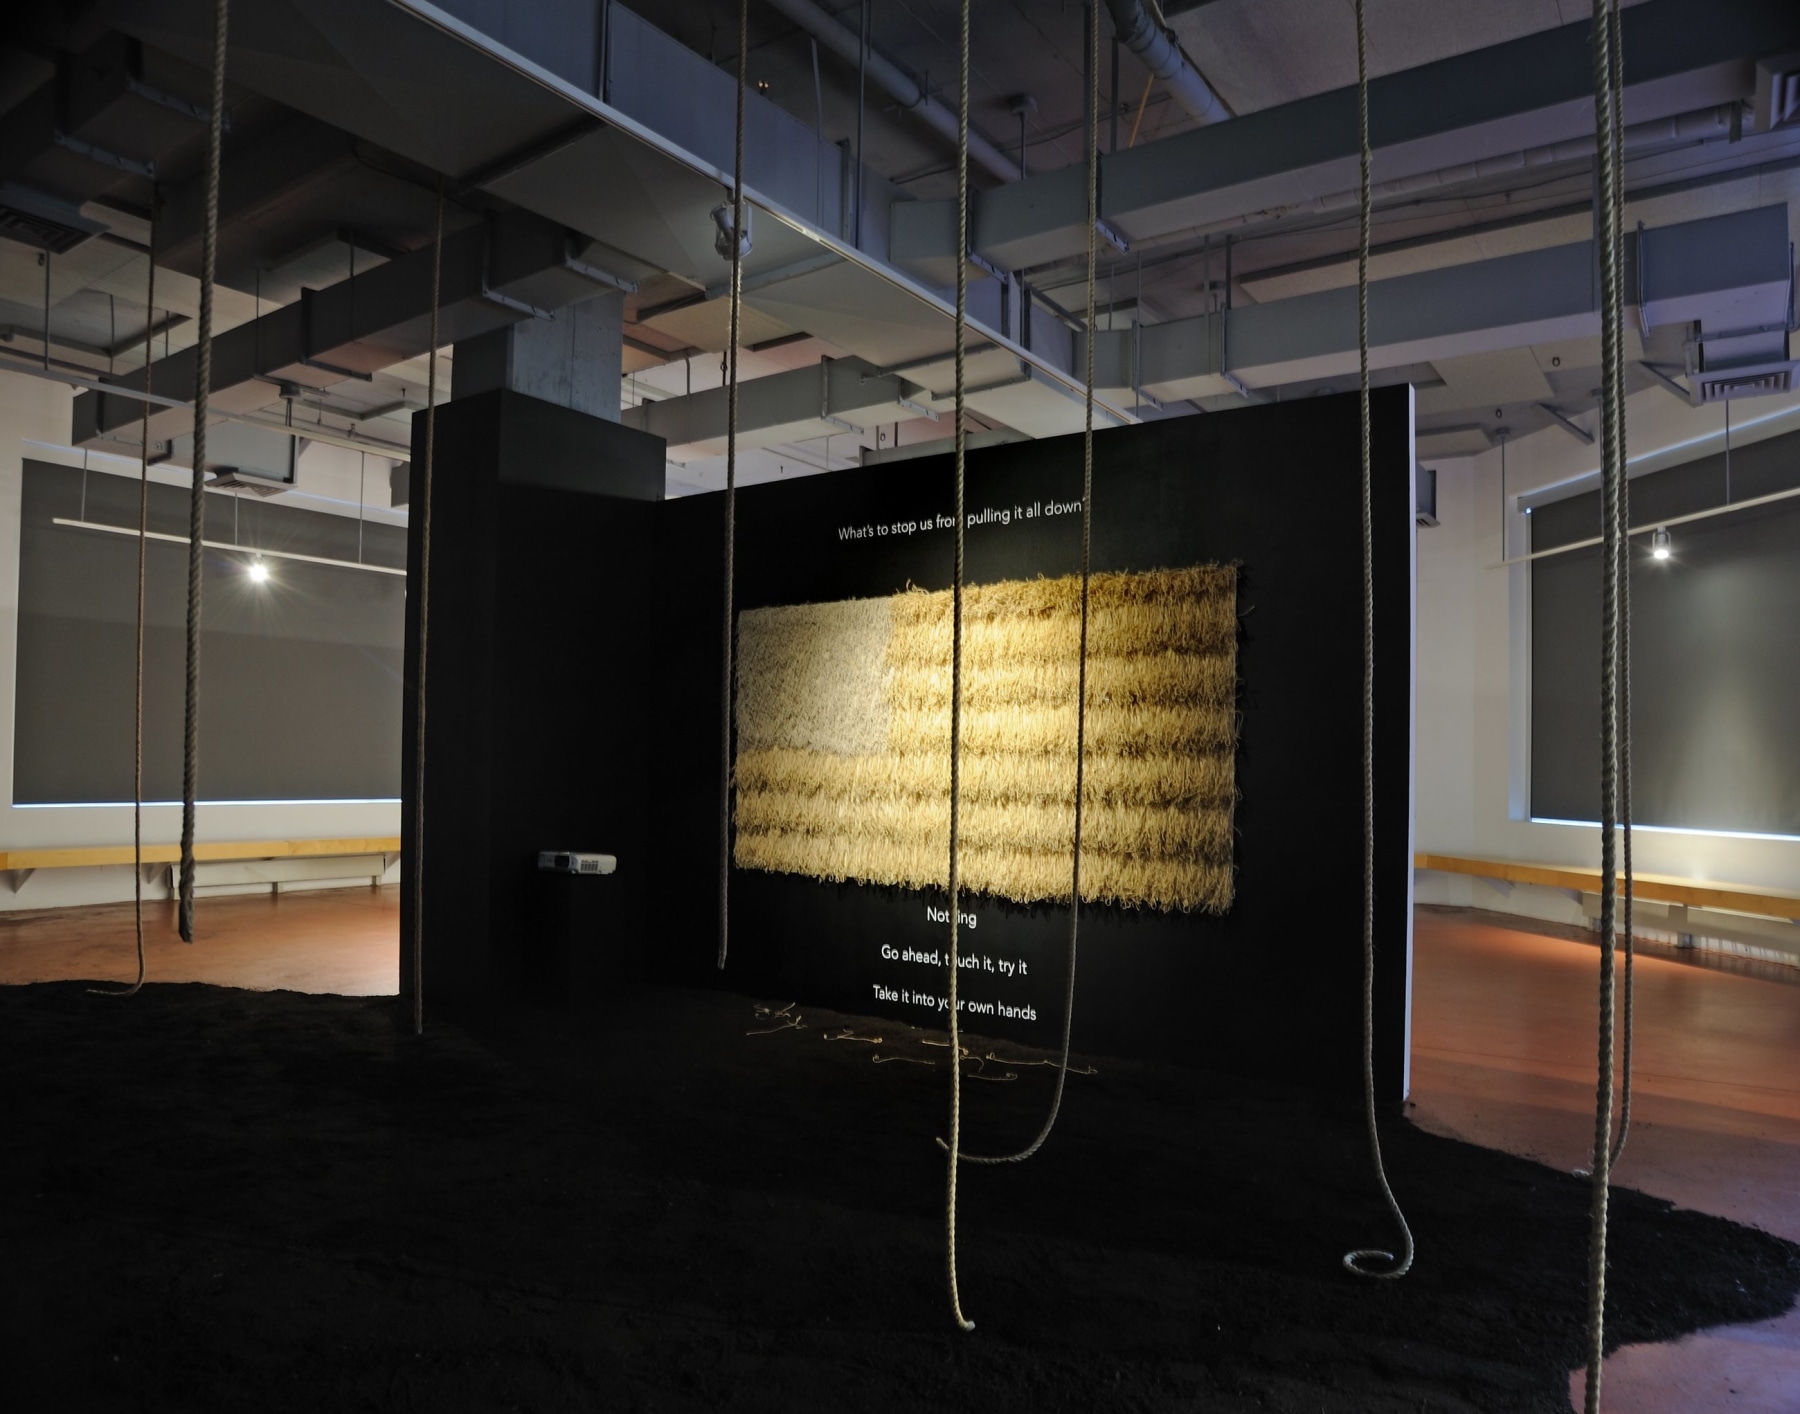 An Excellent Thought About a Quality Idea - Exhibitions - Tephra ICA